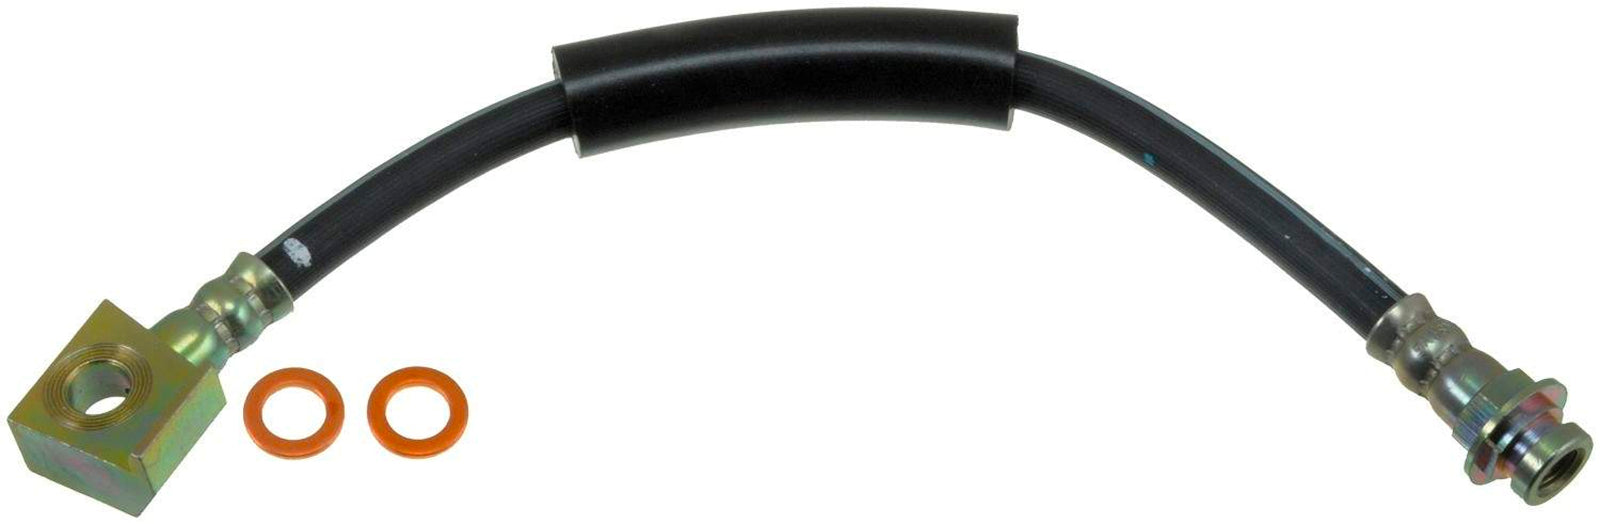 New front left brake line hose for select 1980-1994 Ford Lincoln Mercury cars